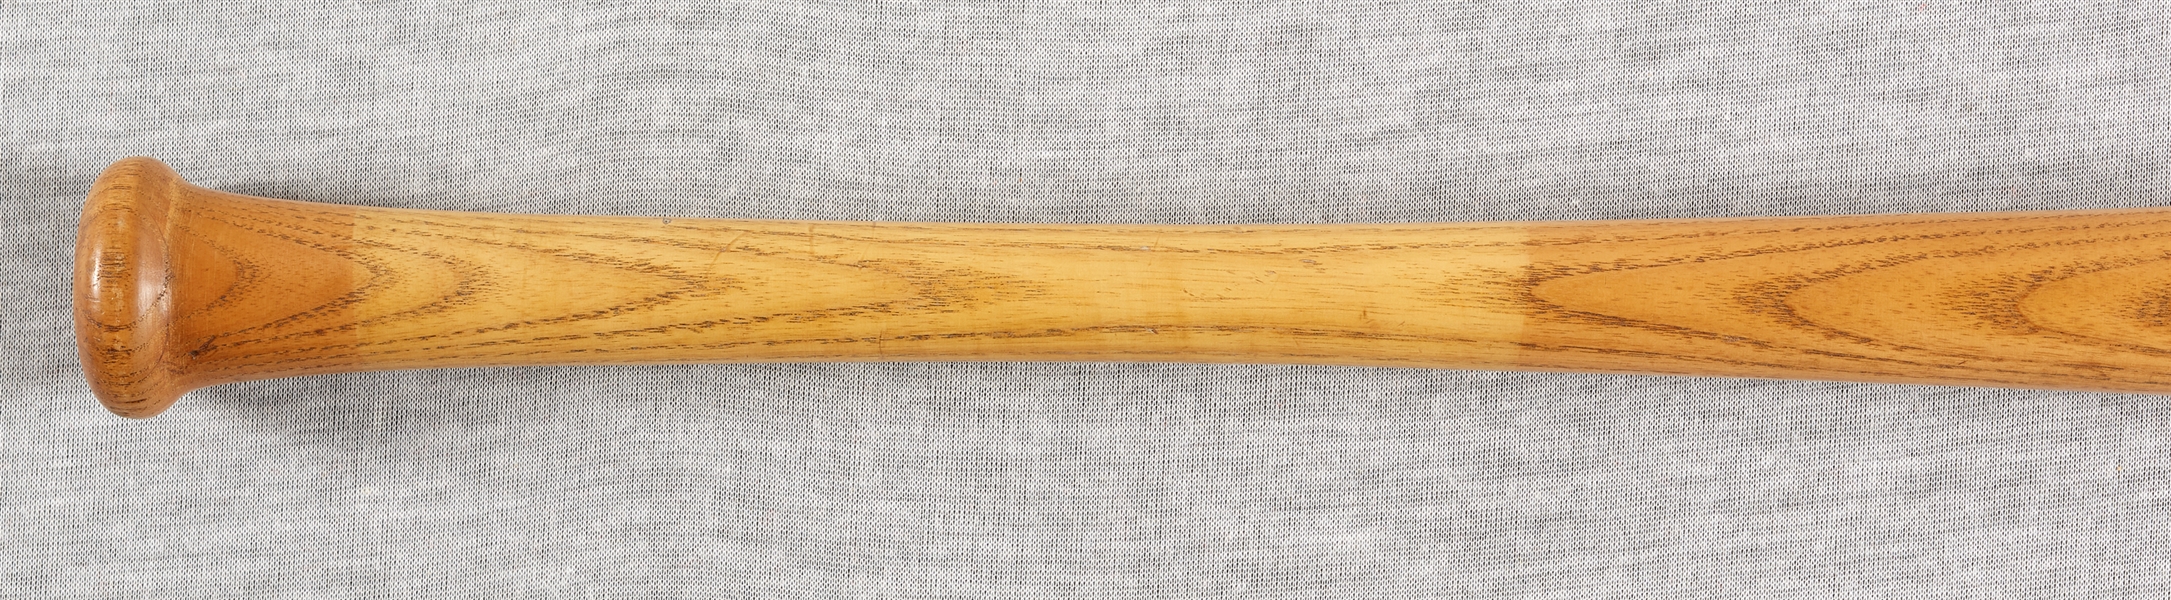 Babe Ruth Late 1920s/Early 1930s H&B Store Model Bat